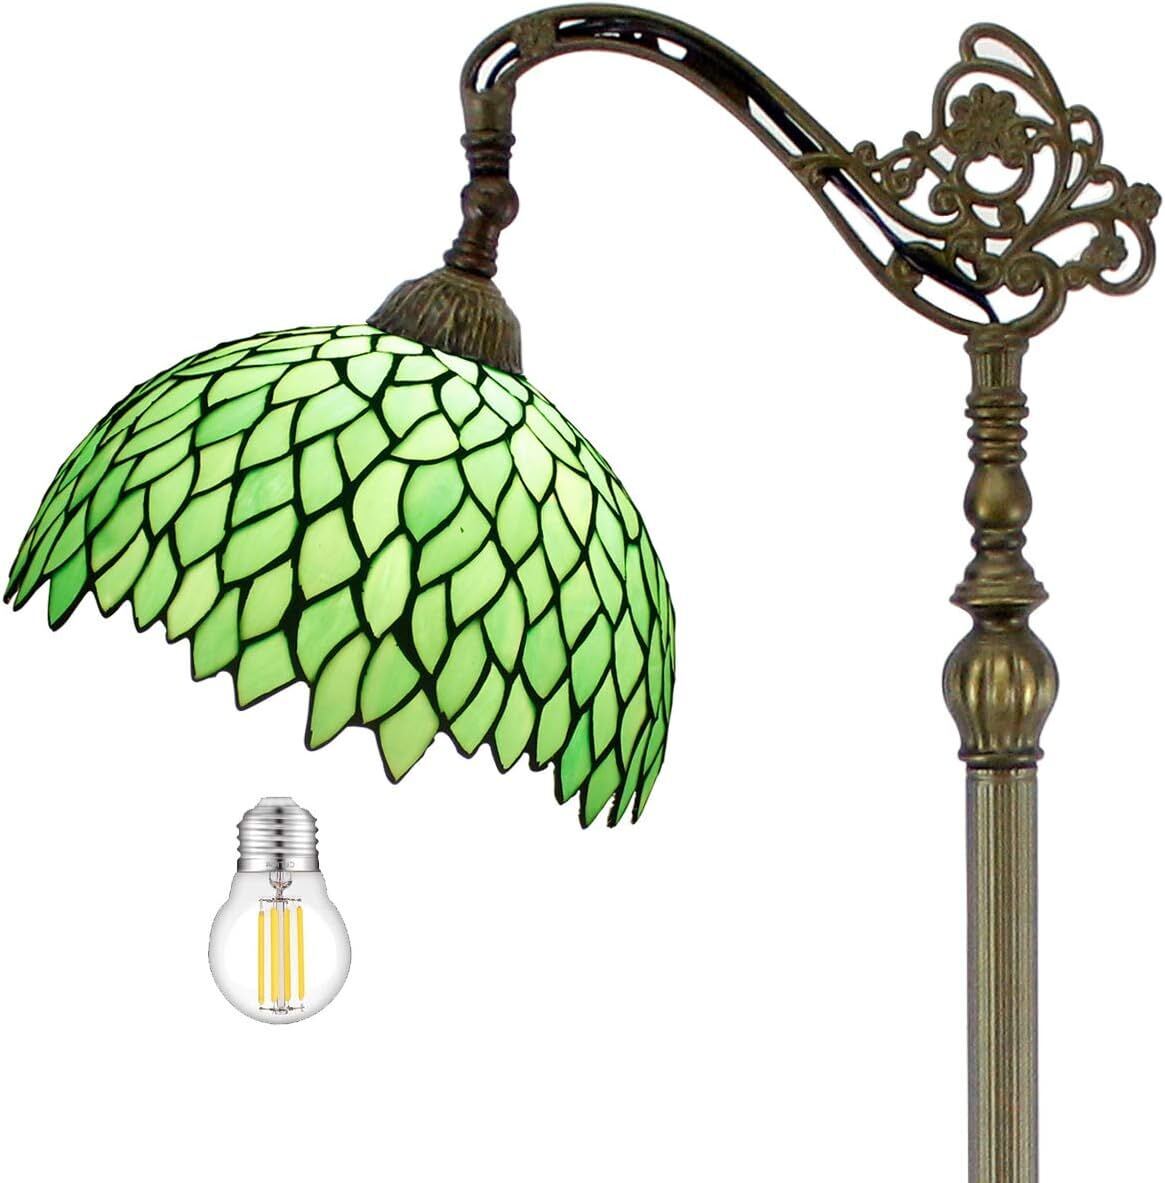 Arched stained glass victorian style floor lamp